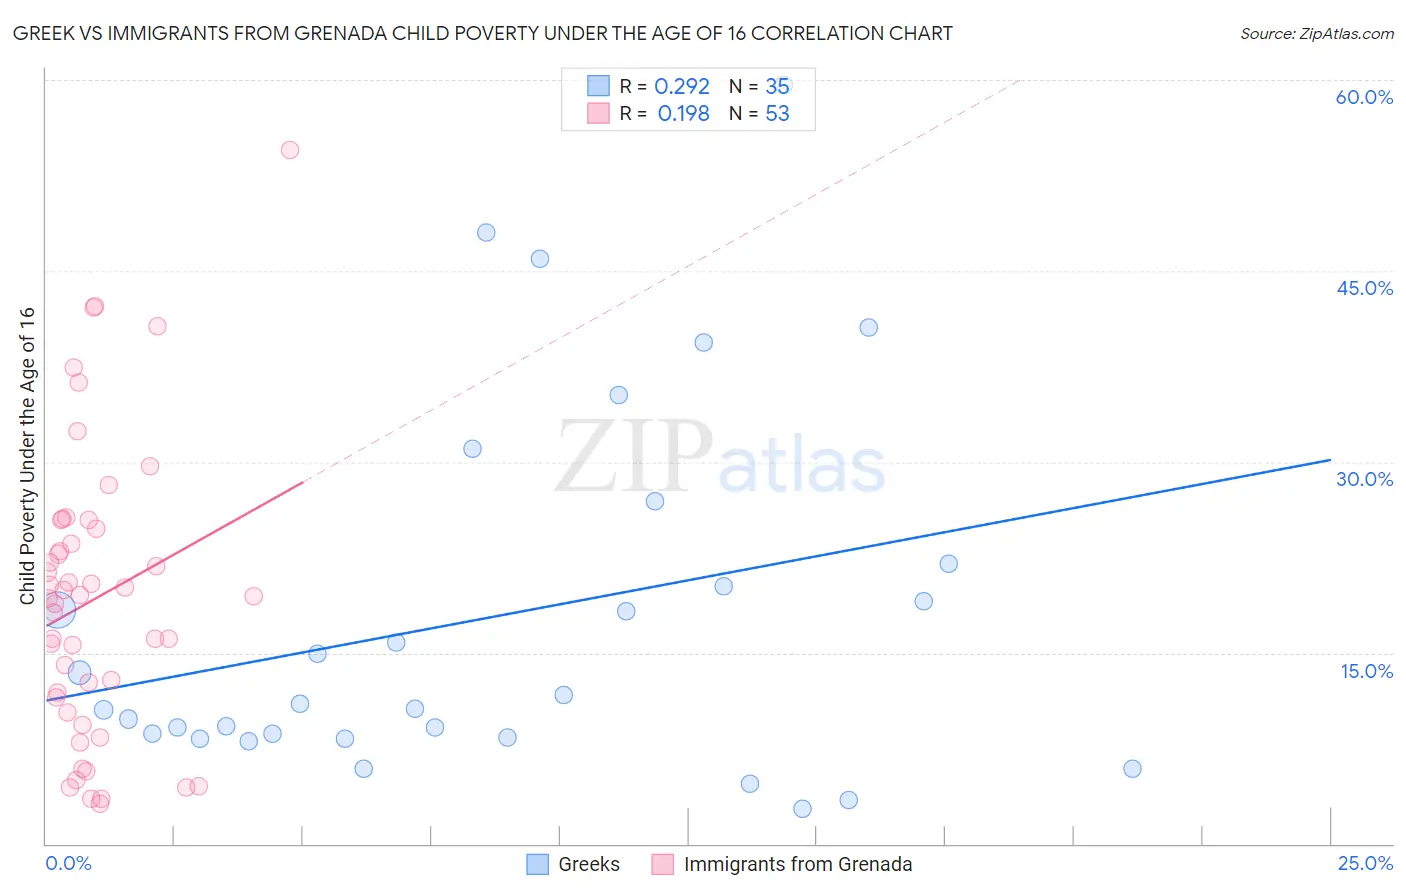 Greek vs Immigrants from Grenada Child Poverty Under the Age of 16